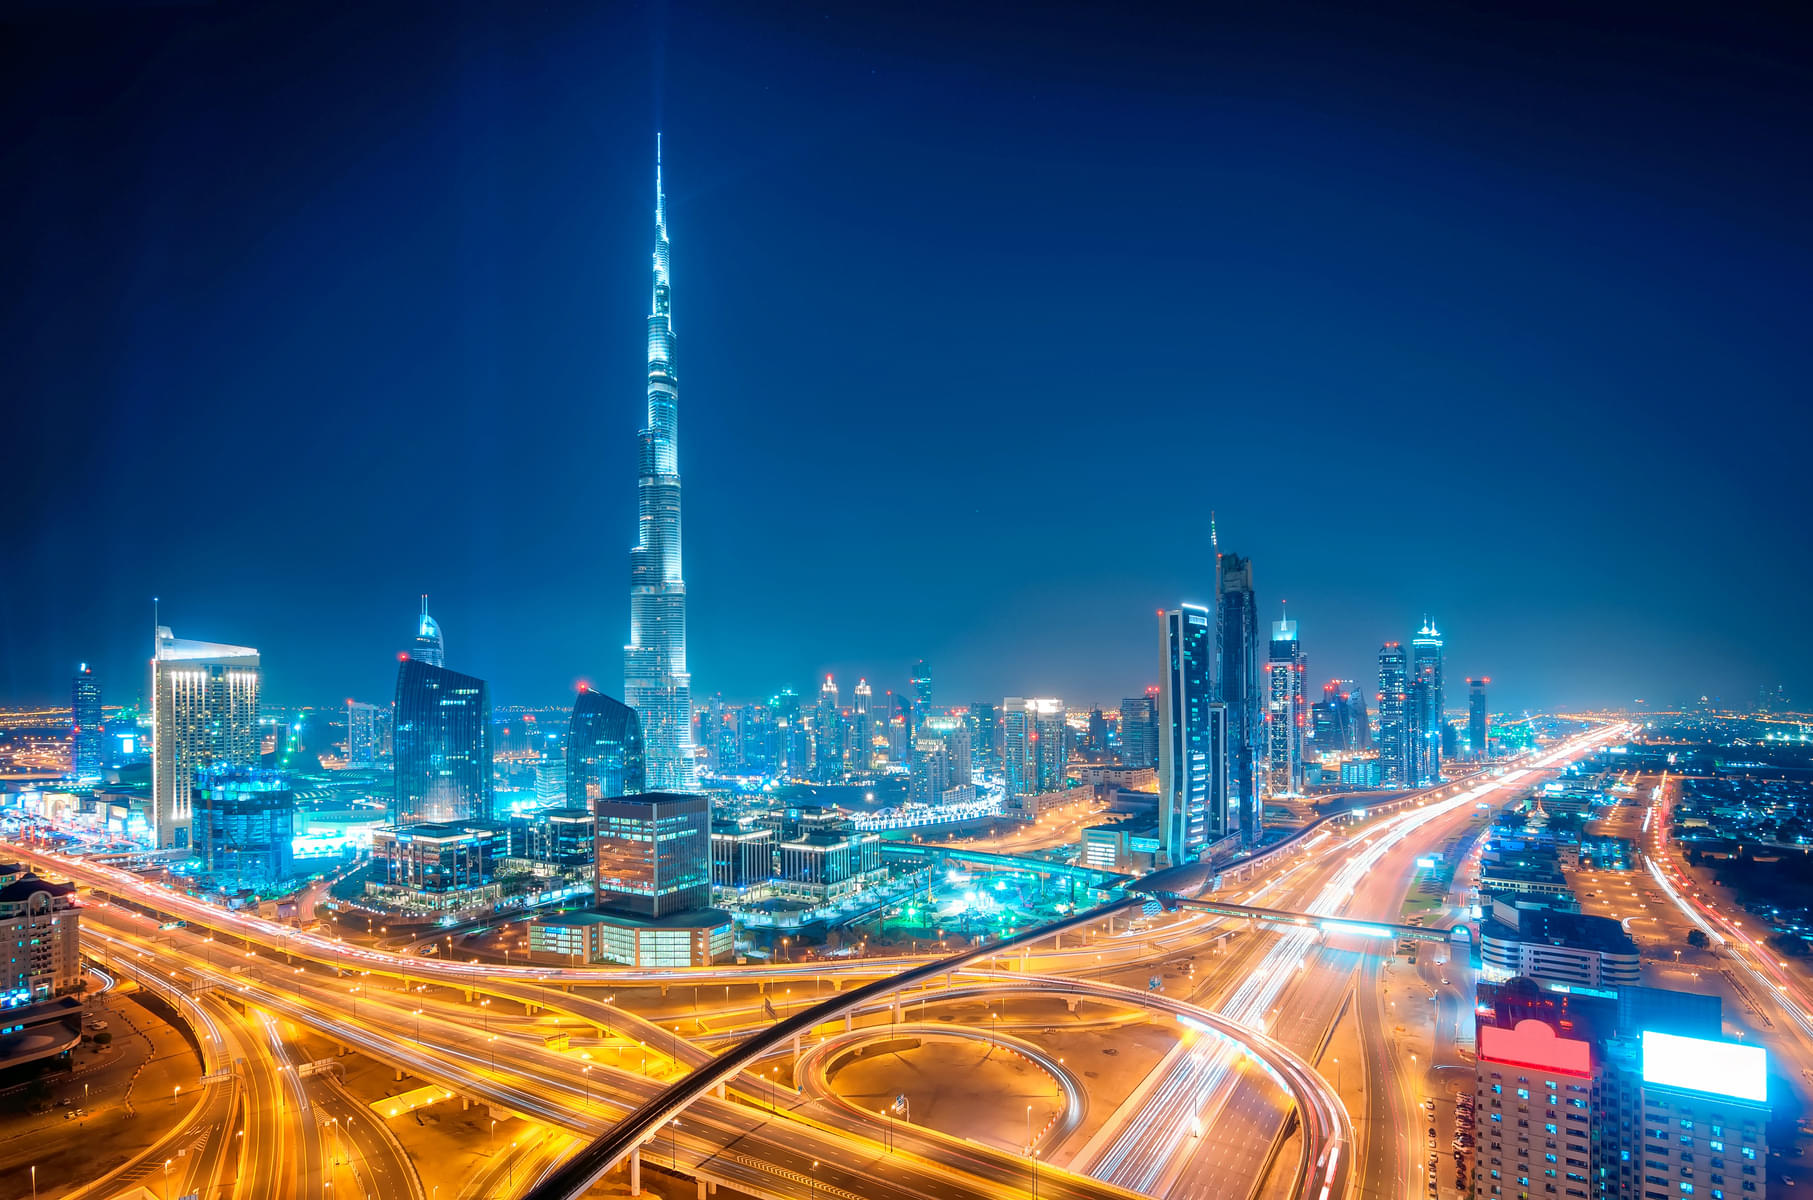 Embark on an fun adventure in this dazzling metropolis of the Middle East experiencing Dubai's past & future